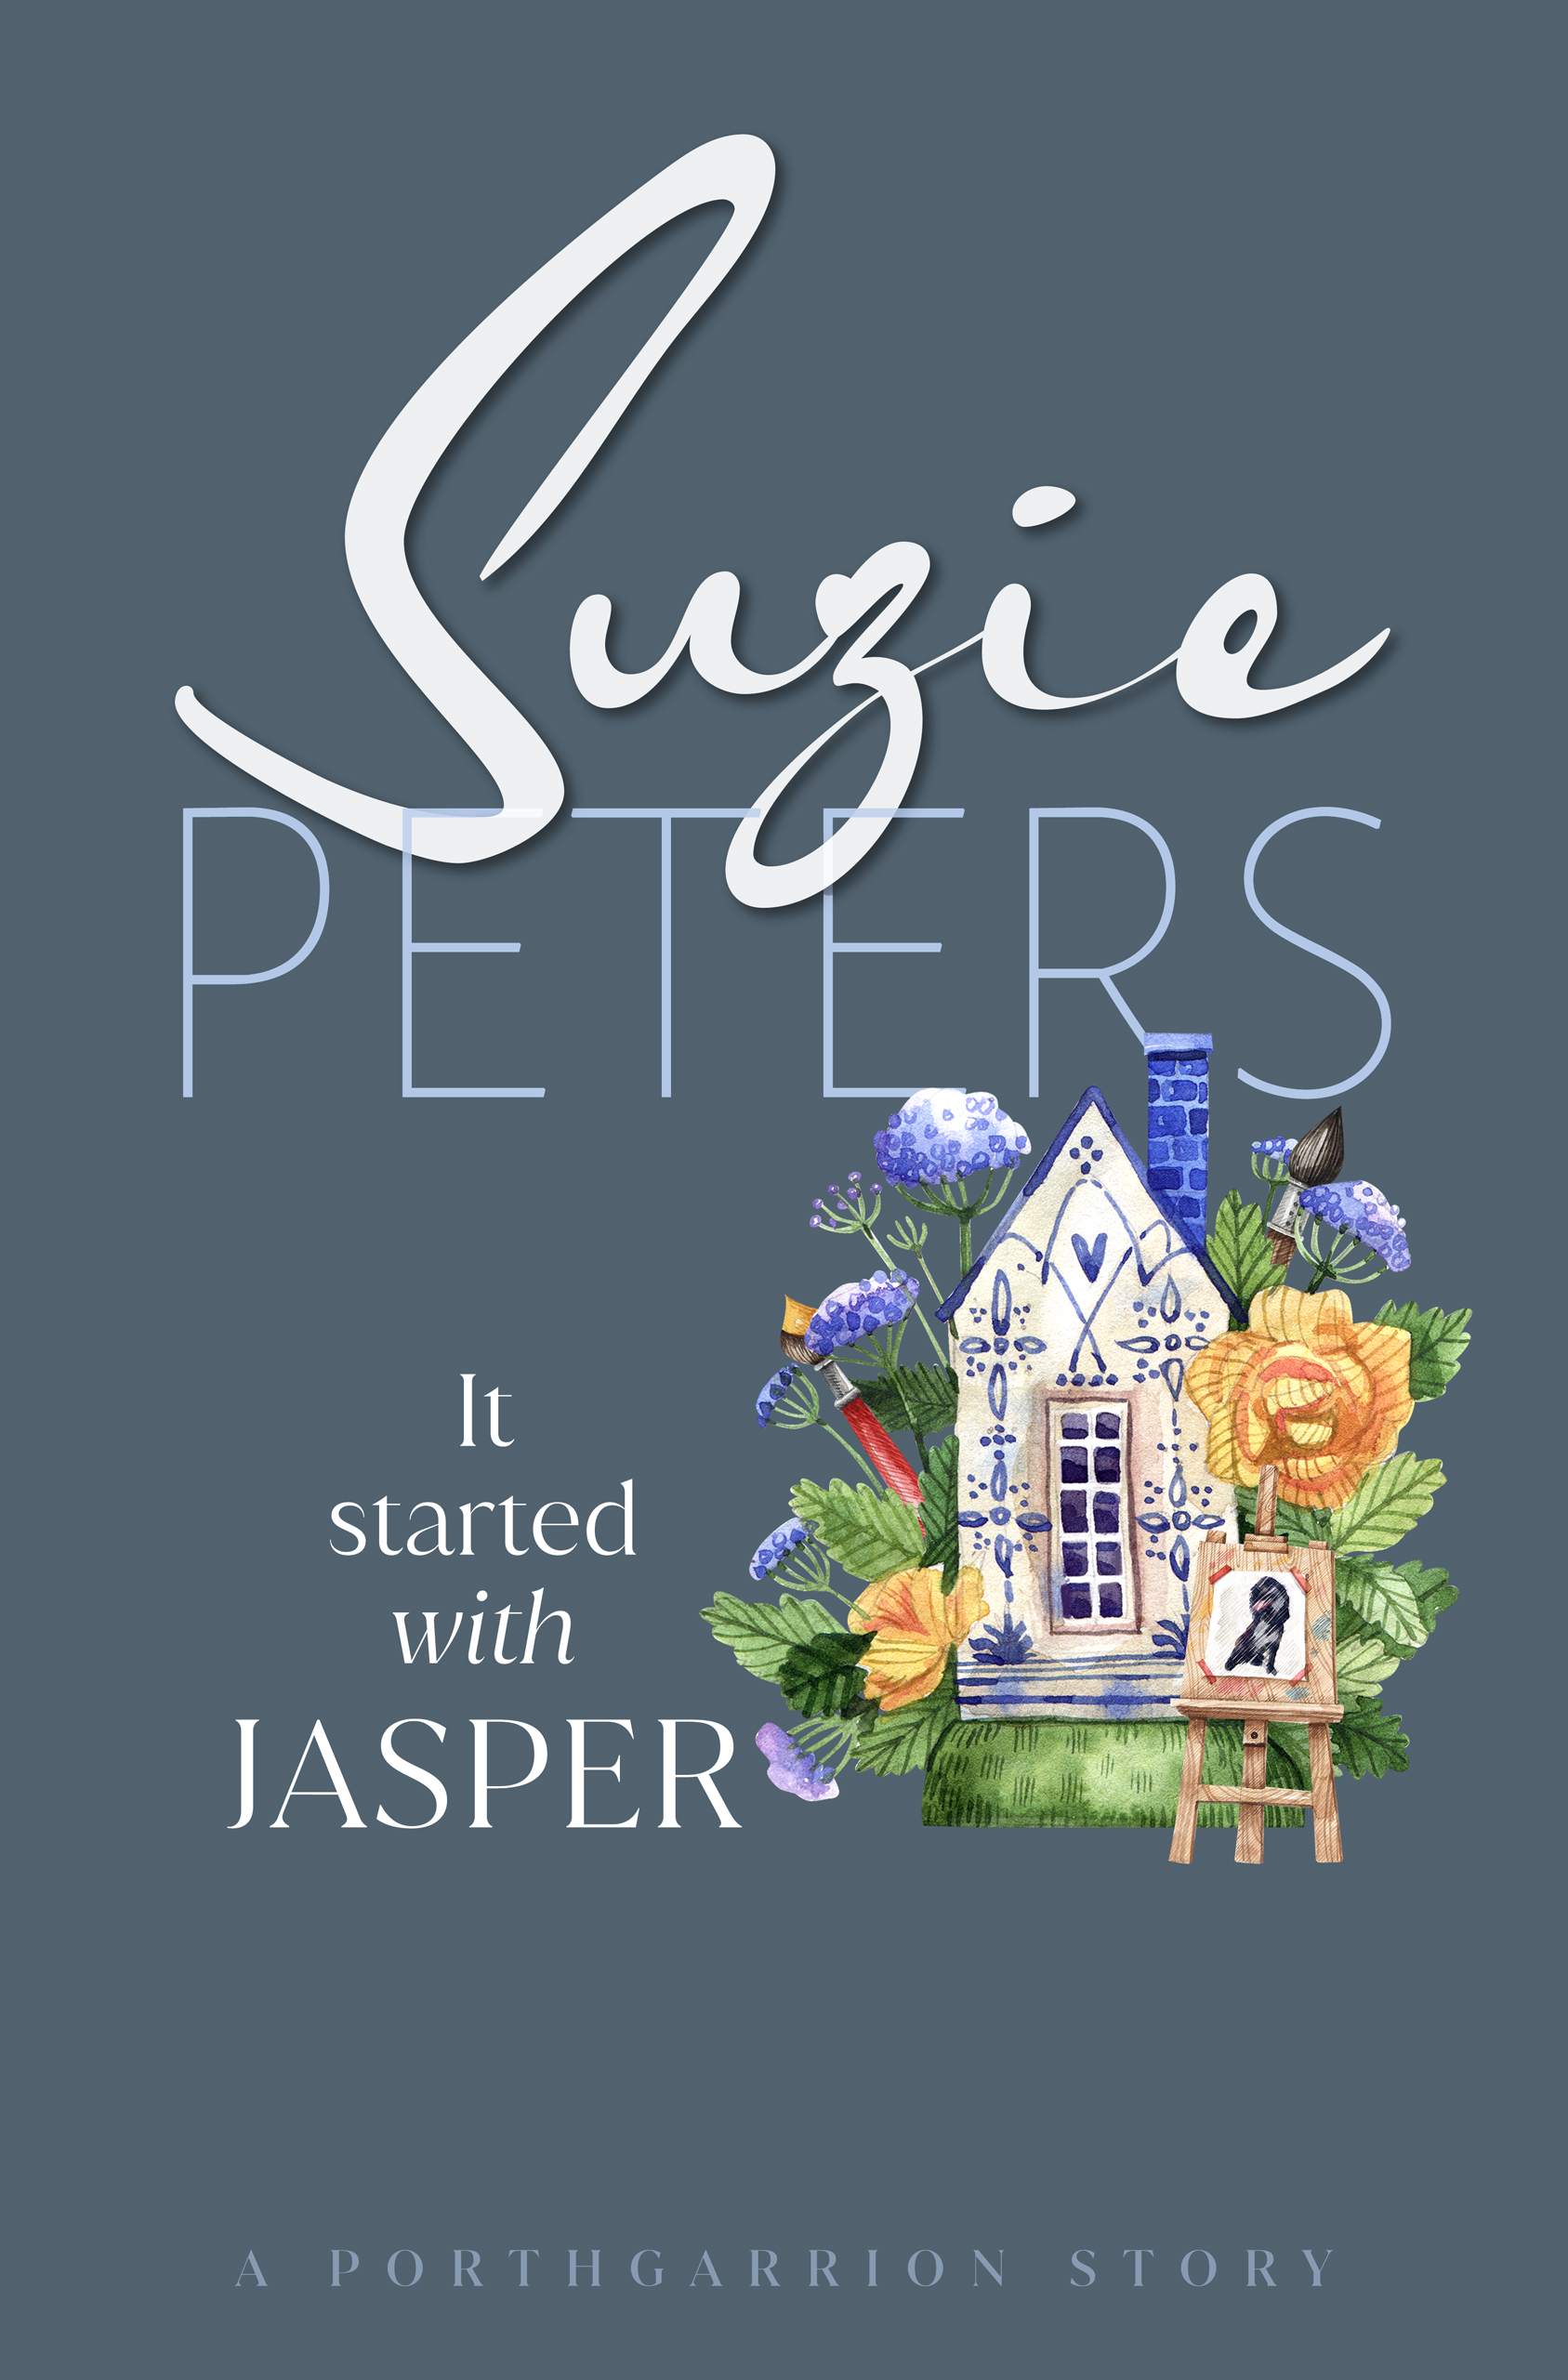 Porthgarrion Series: It Started with Jasper by Suzie Peters.